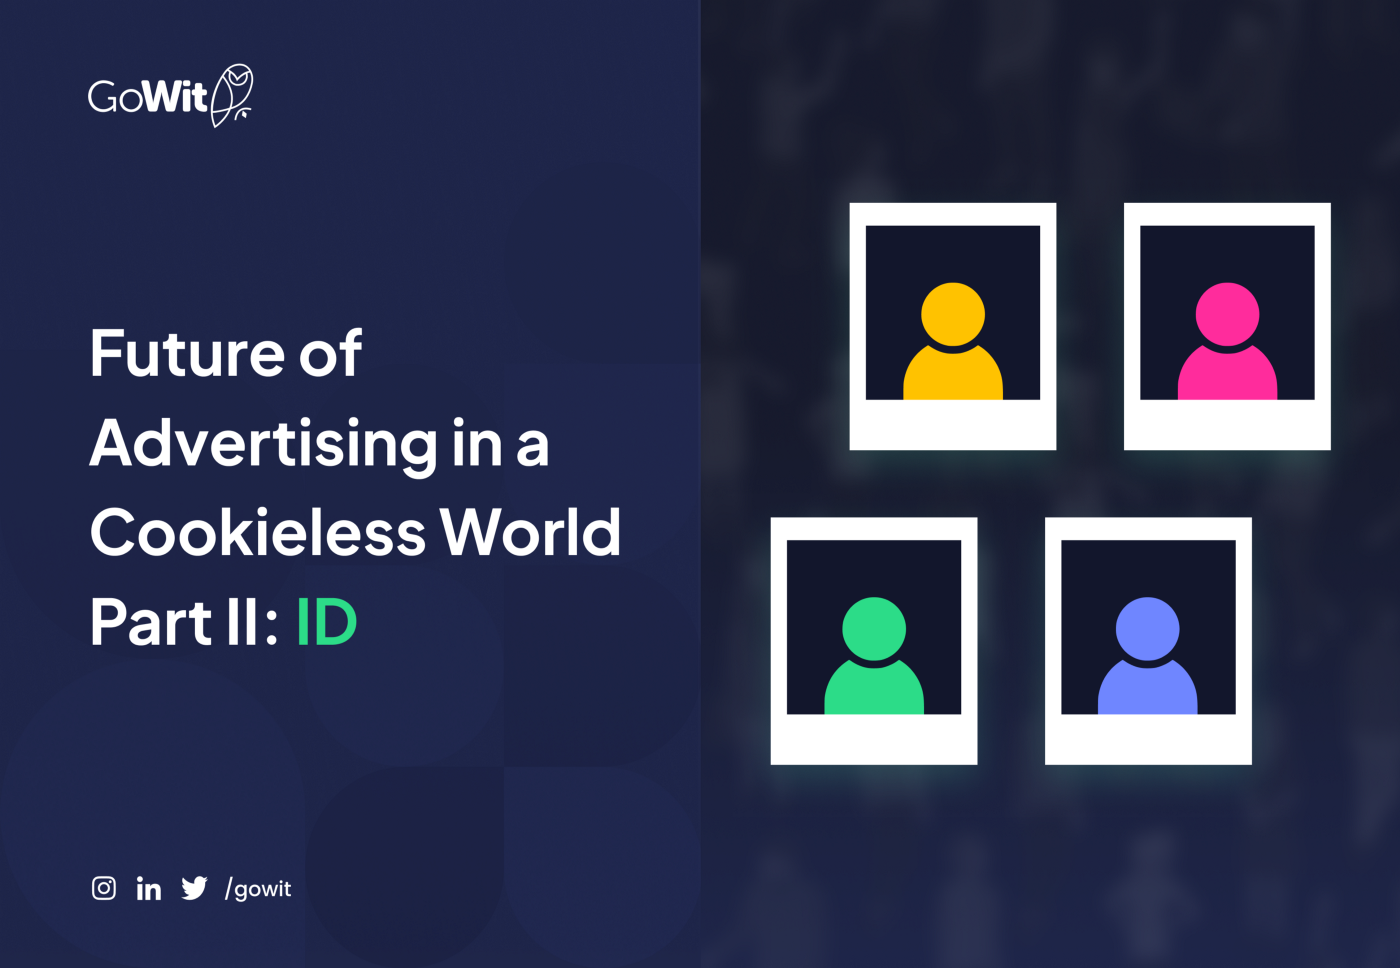 The Future of Advertising in a Cookieless World Part 2: ID